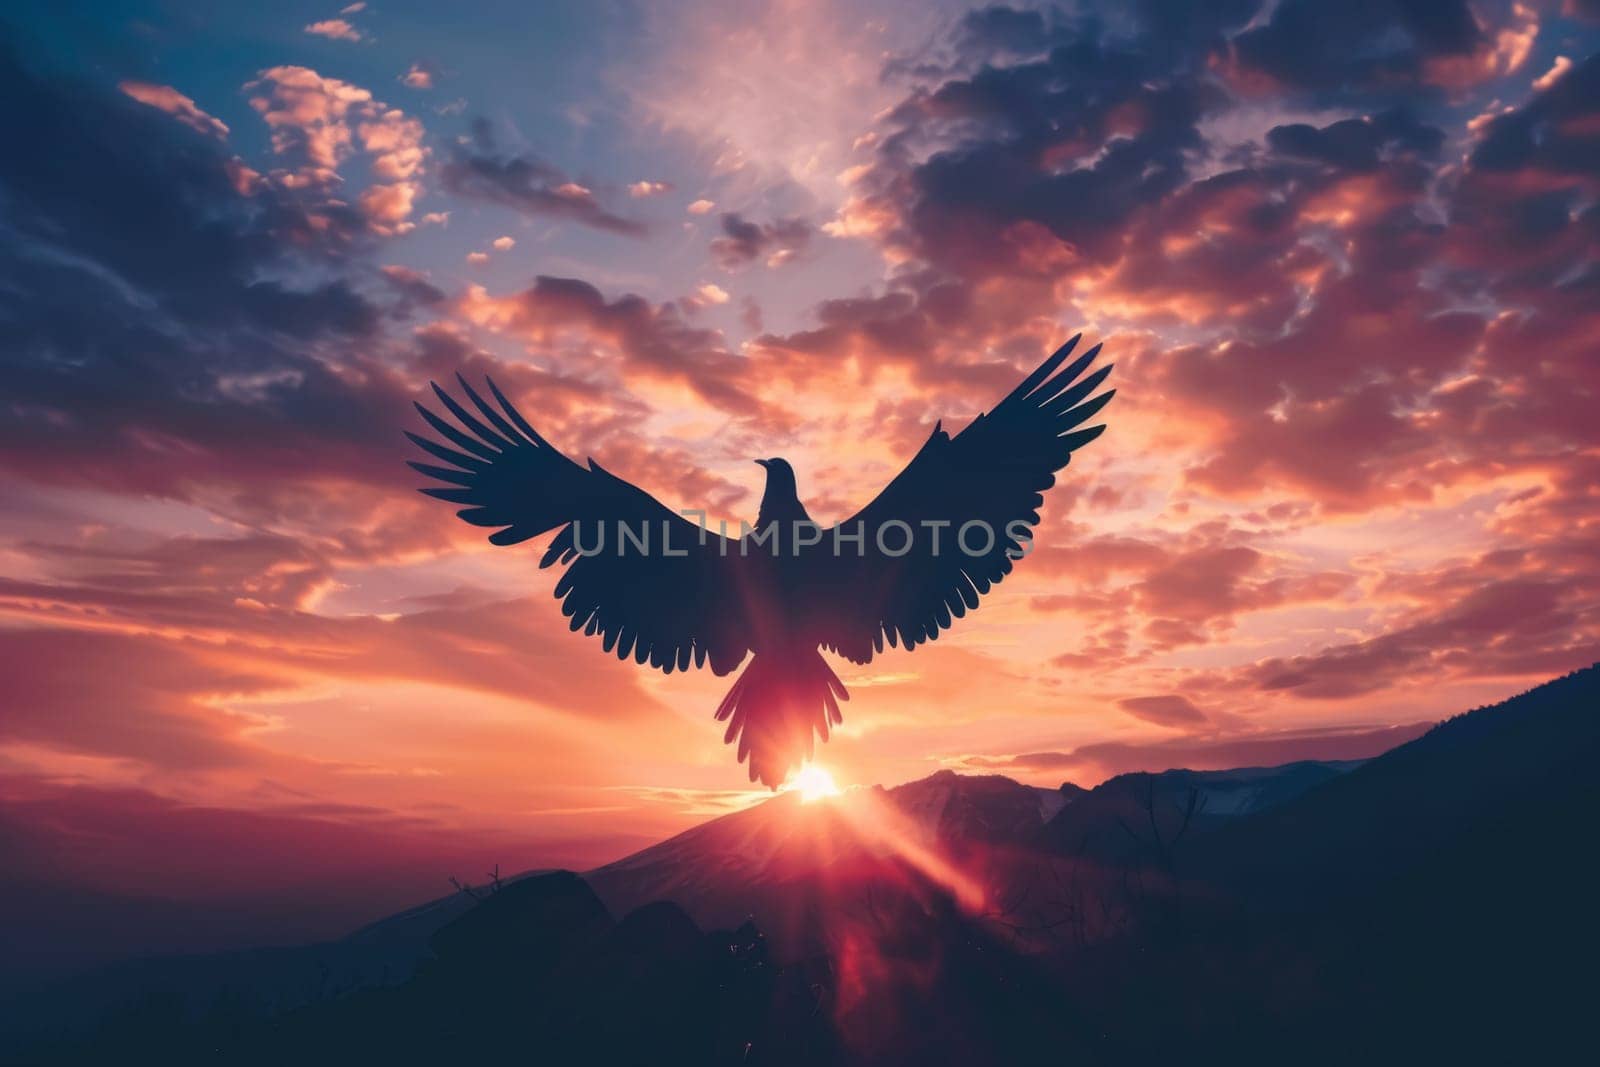 The silhouette of a majestic bird soars upward with open wings against the backdrop of a breathtaking dawn sky, evoking a sense of rebirth.